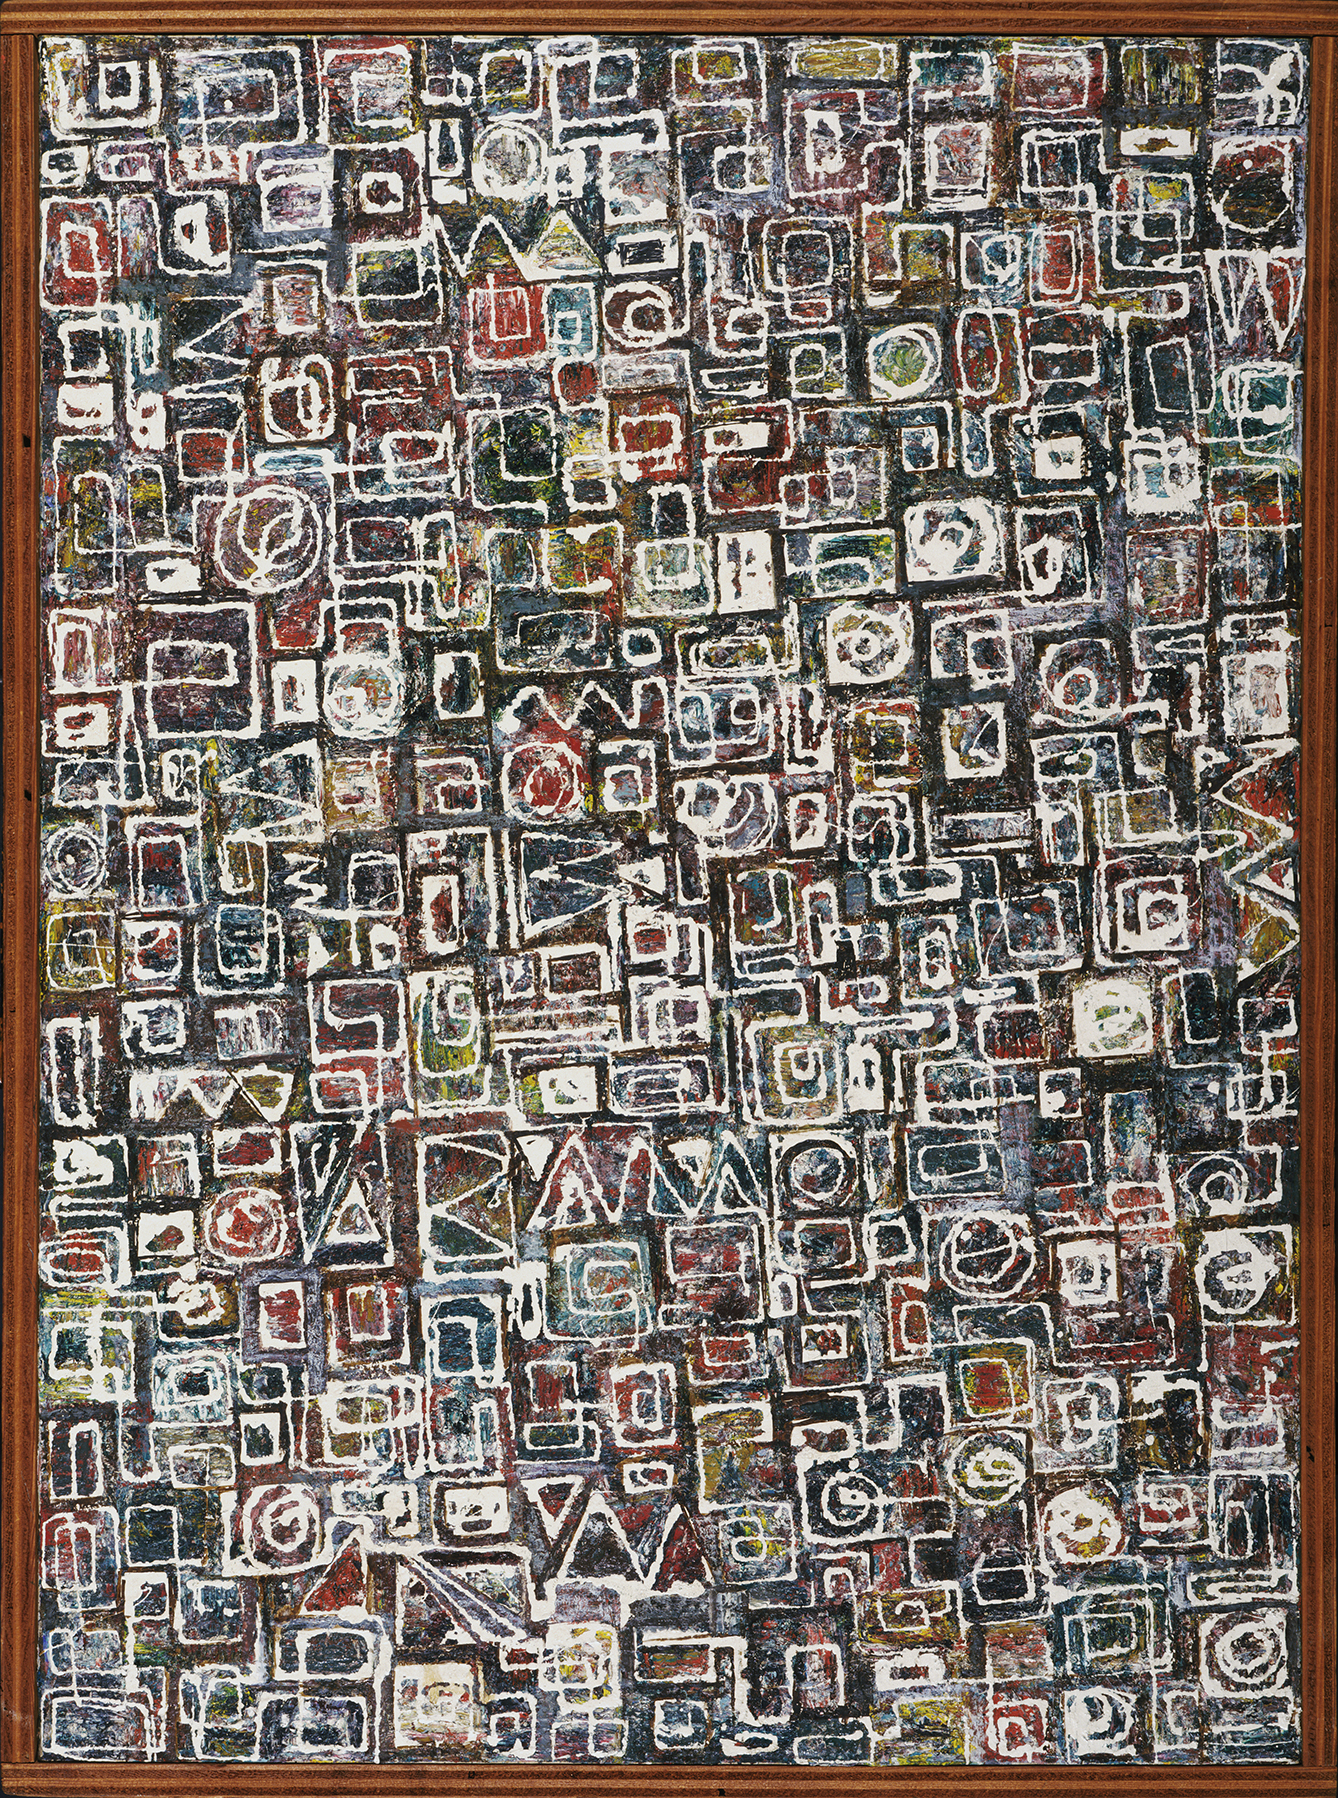 Lee Krasner (American, 1908–1984), Composition, 1949, oil on canvas, 38-1/16 x 27-13/16 inches, Philadelphia Museum of Art: Gift of the Aaron E. Norman Fund, Inc., 1959, 1959-31-1 © Pollock-Krasner Foundation / Artists Rights Society (ARS), New York